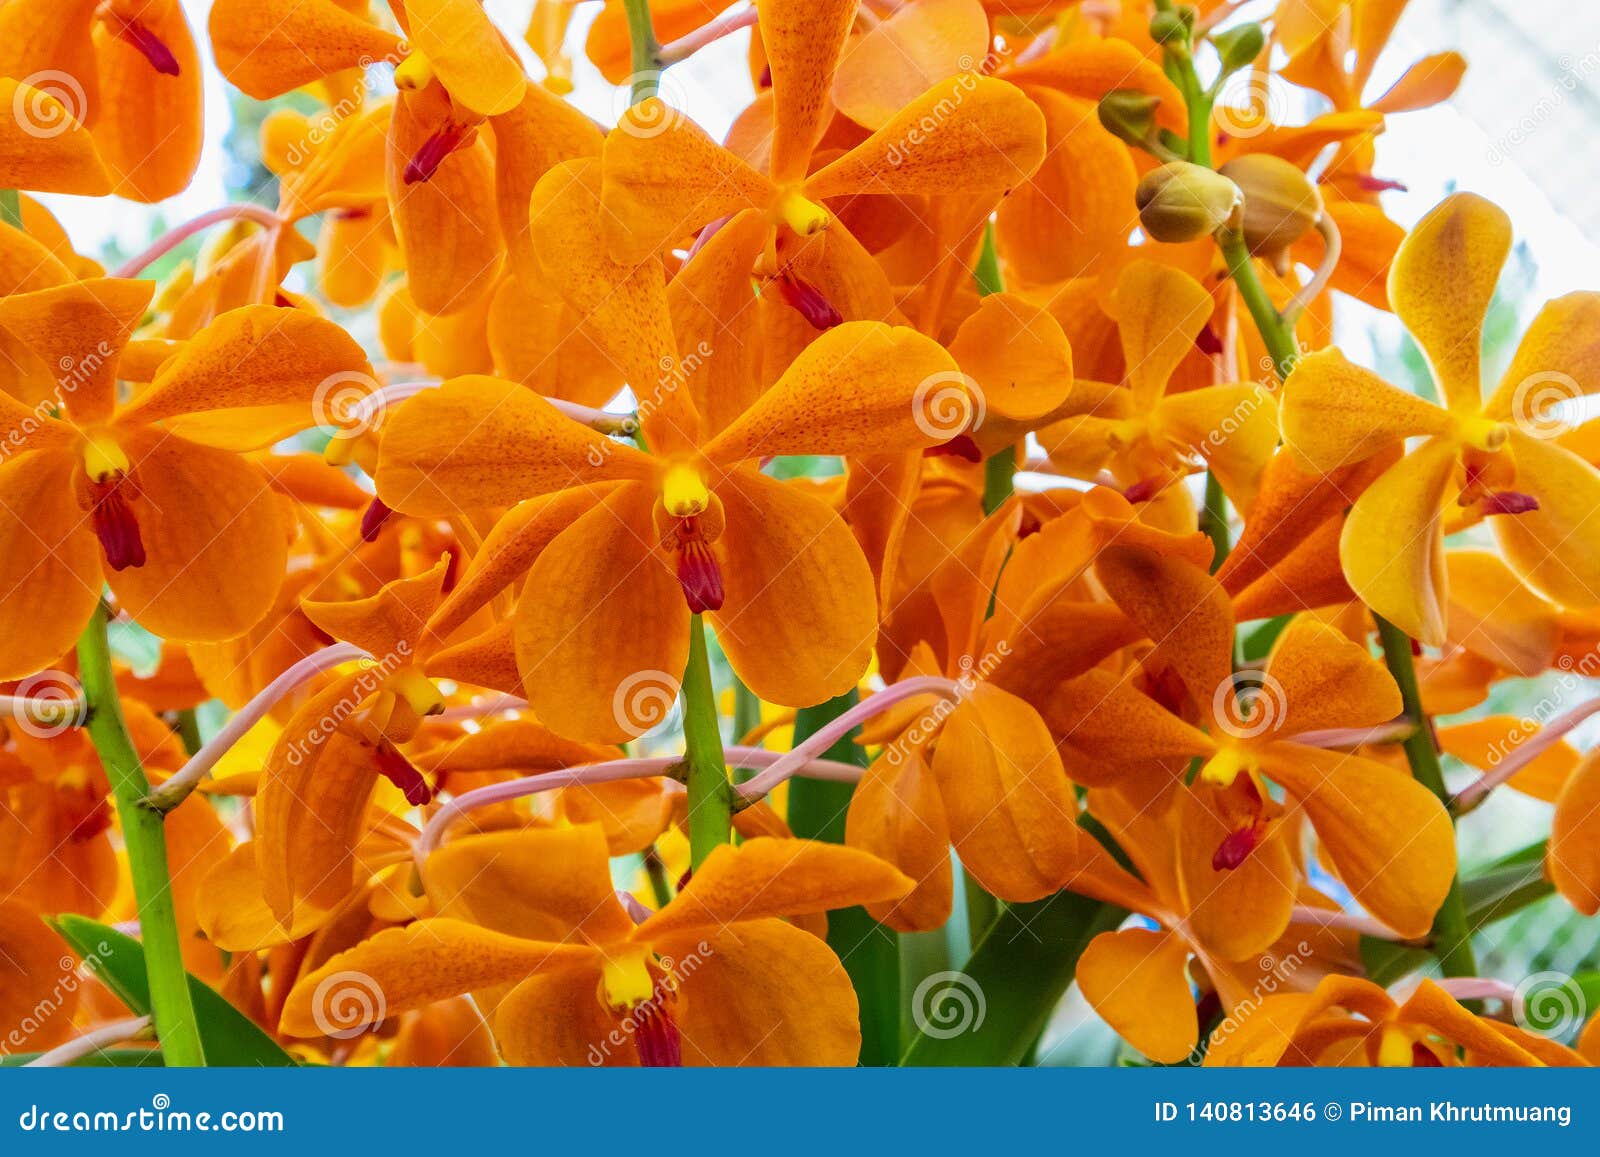 Orange Color Vanda Orchid Flowers Stock Photo - Image of color, blooming:  140813646